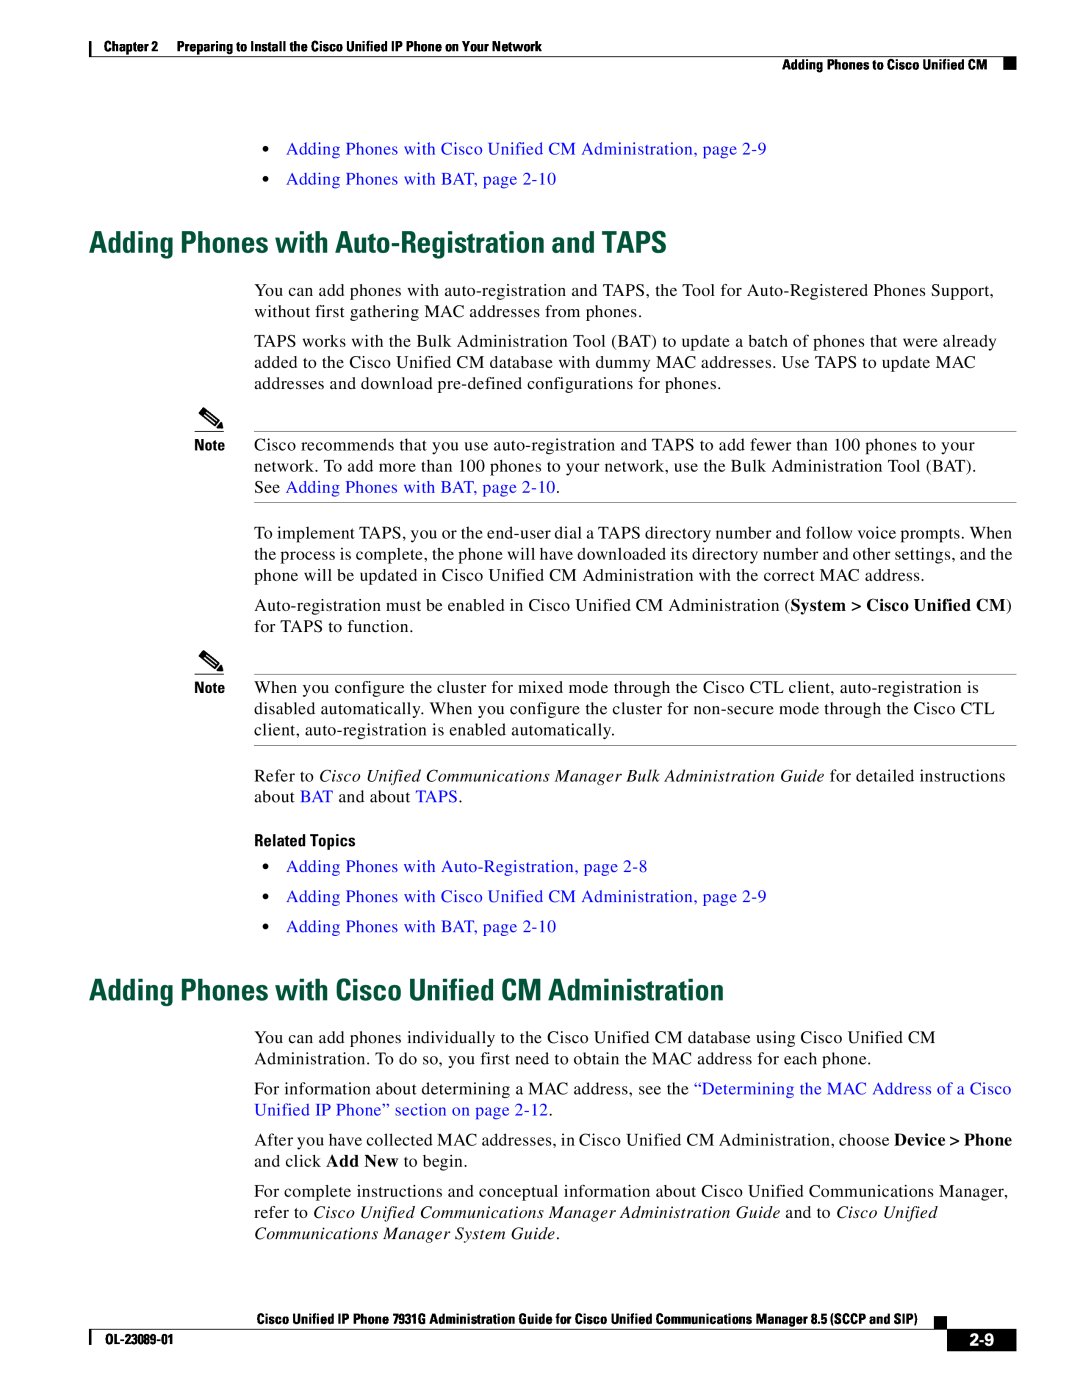 Cisco Systems OL-23089-01 Adding Phones with Auto-Registration and TAPS, Adding Phones with BAT, page, Related Topics 